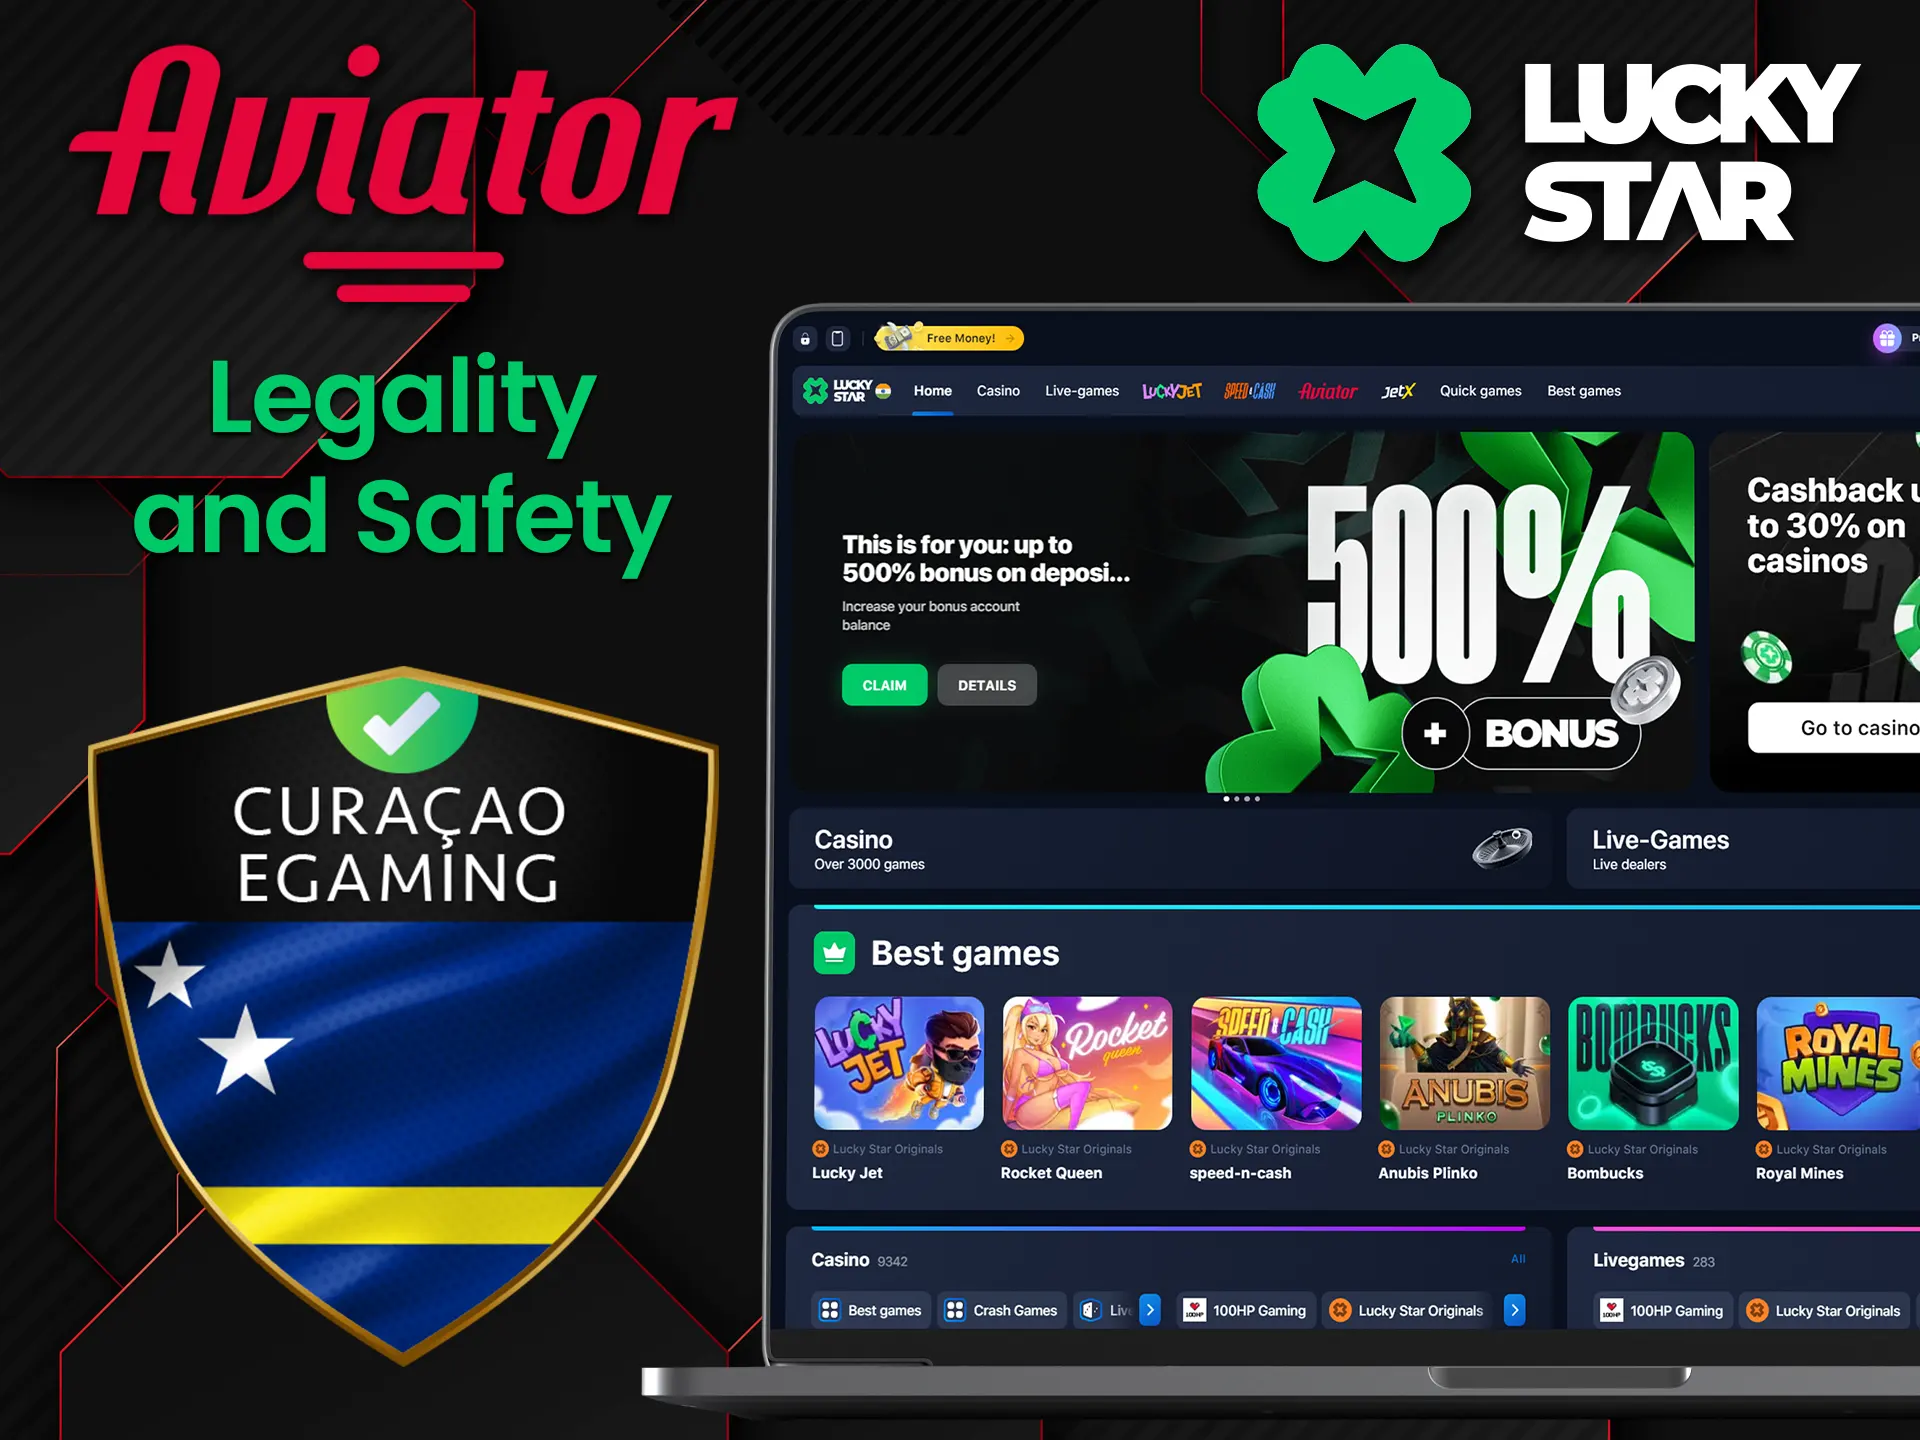 The Lucky Star gaming platform is a trusted place to play Aviator and other crash games.